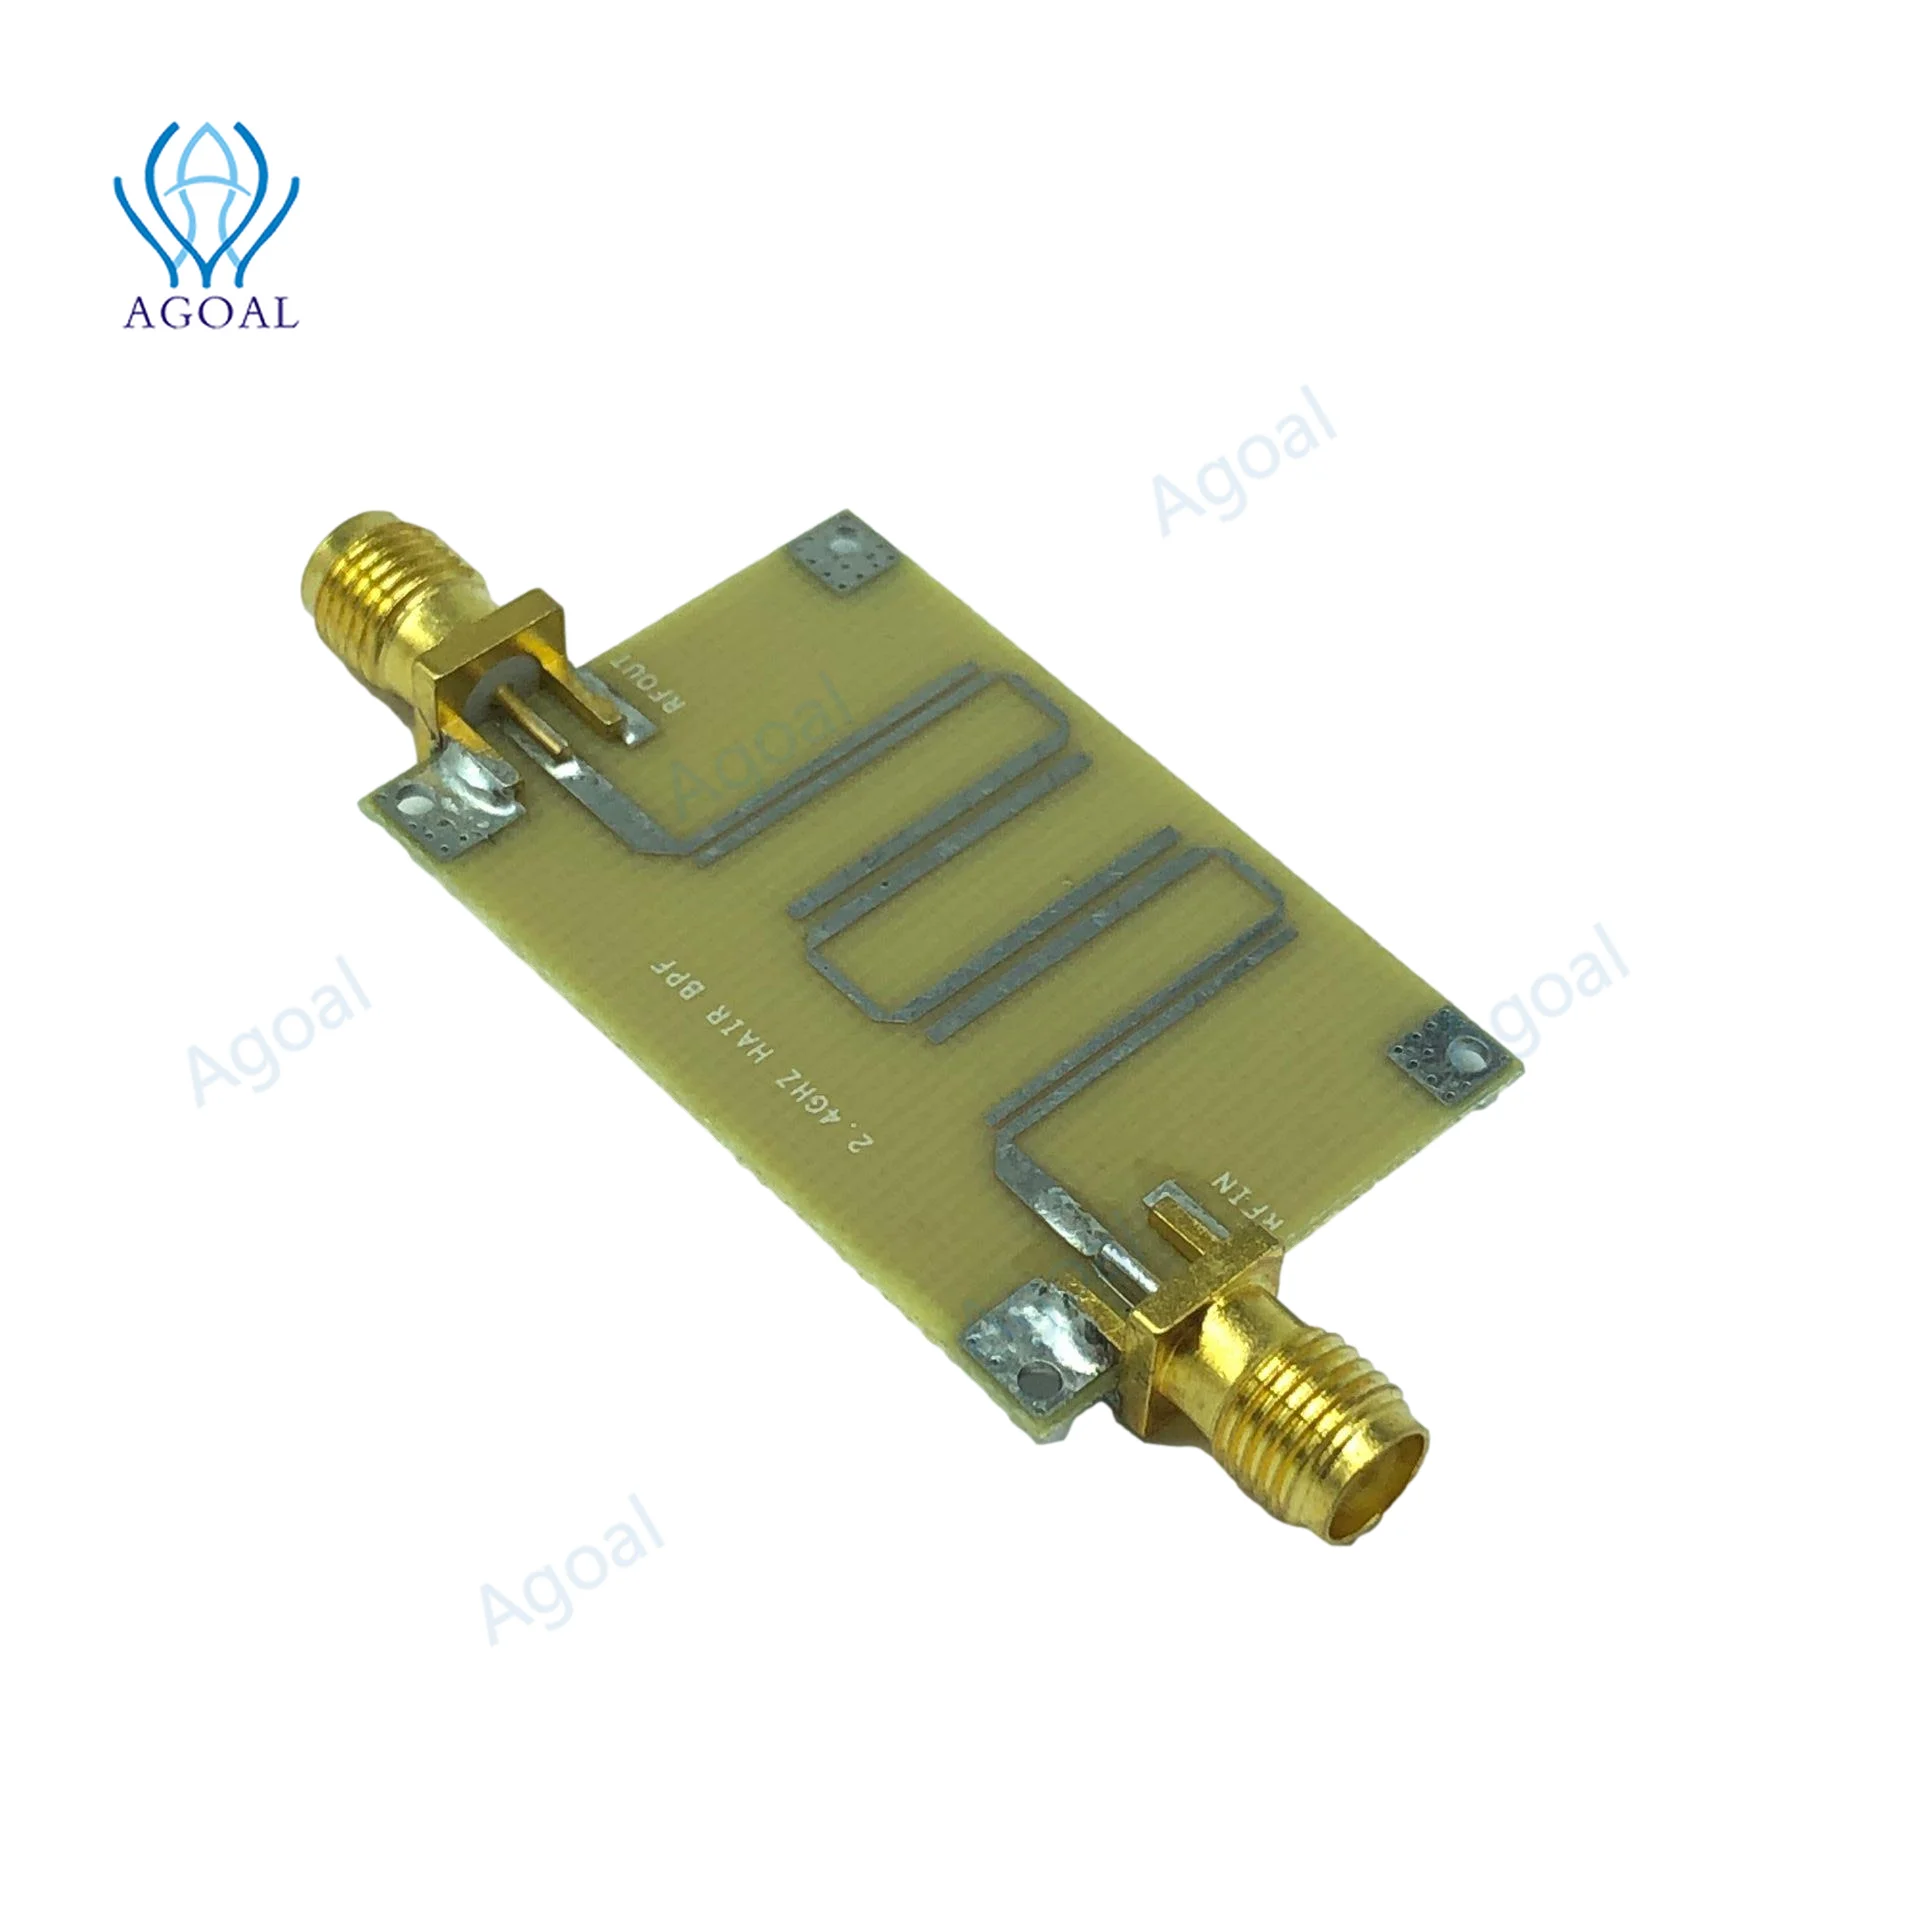 best hd antenna indoor 2.4GHZ Microstrip Bandpass Filter Replace Accessories Parts Practical Filter Microstrip Bandpass Filter box stream